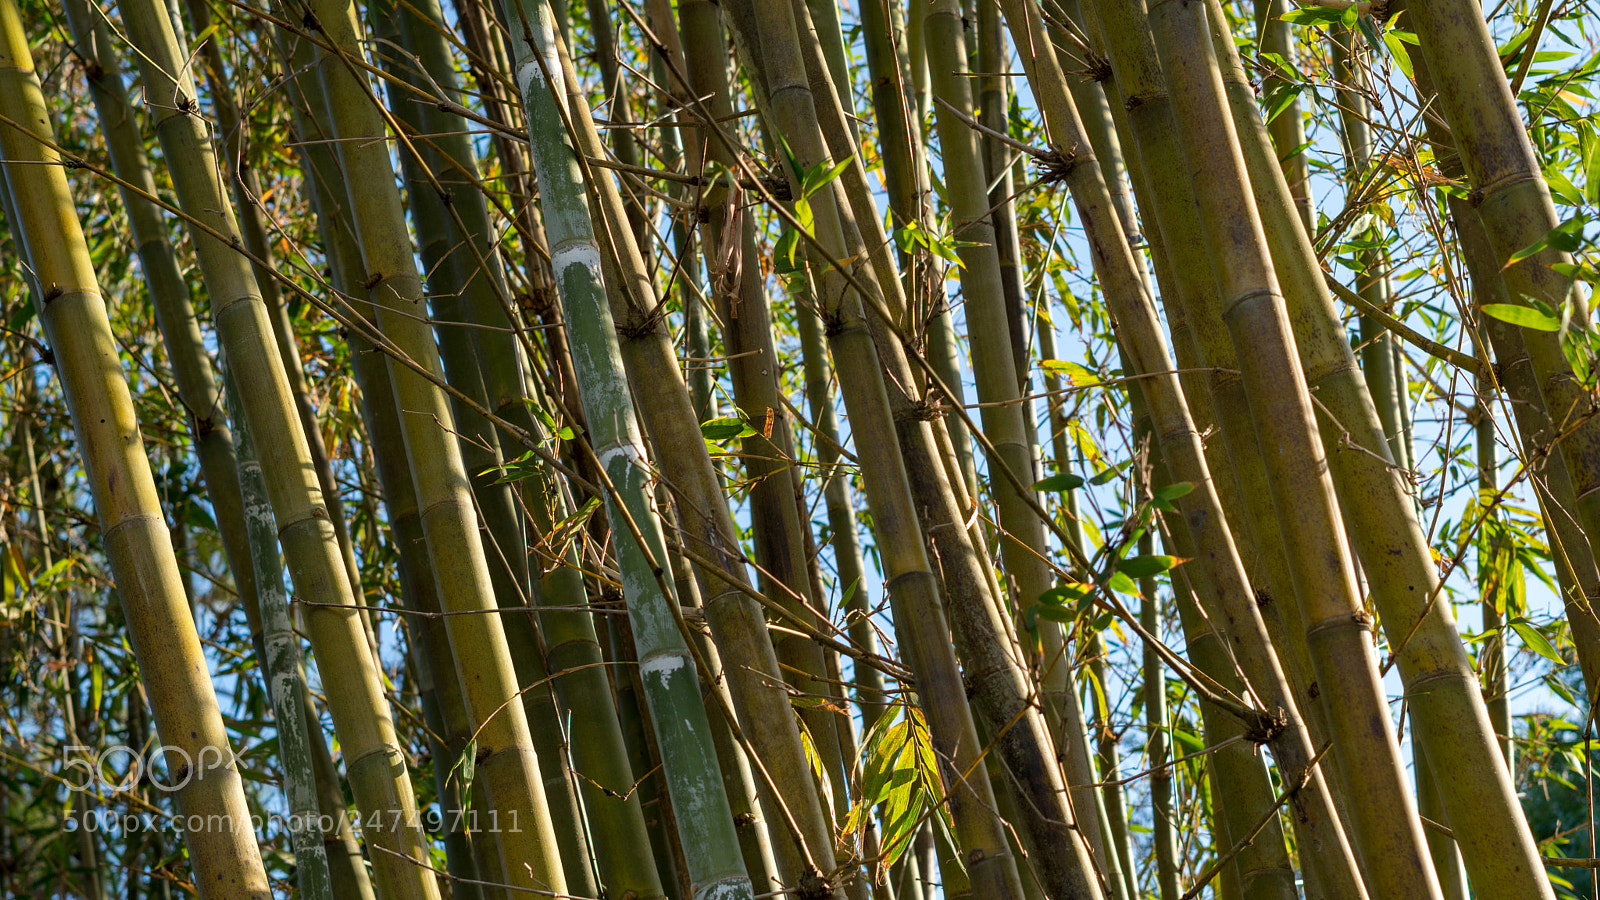 Sony a6500 sample photo. Bamboo leaning to the photography